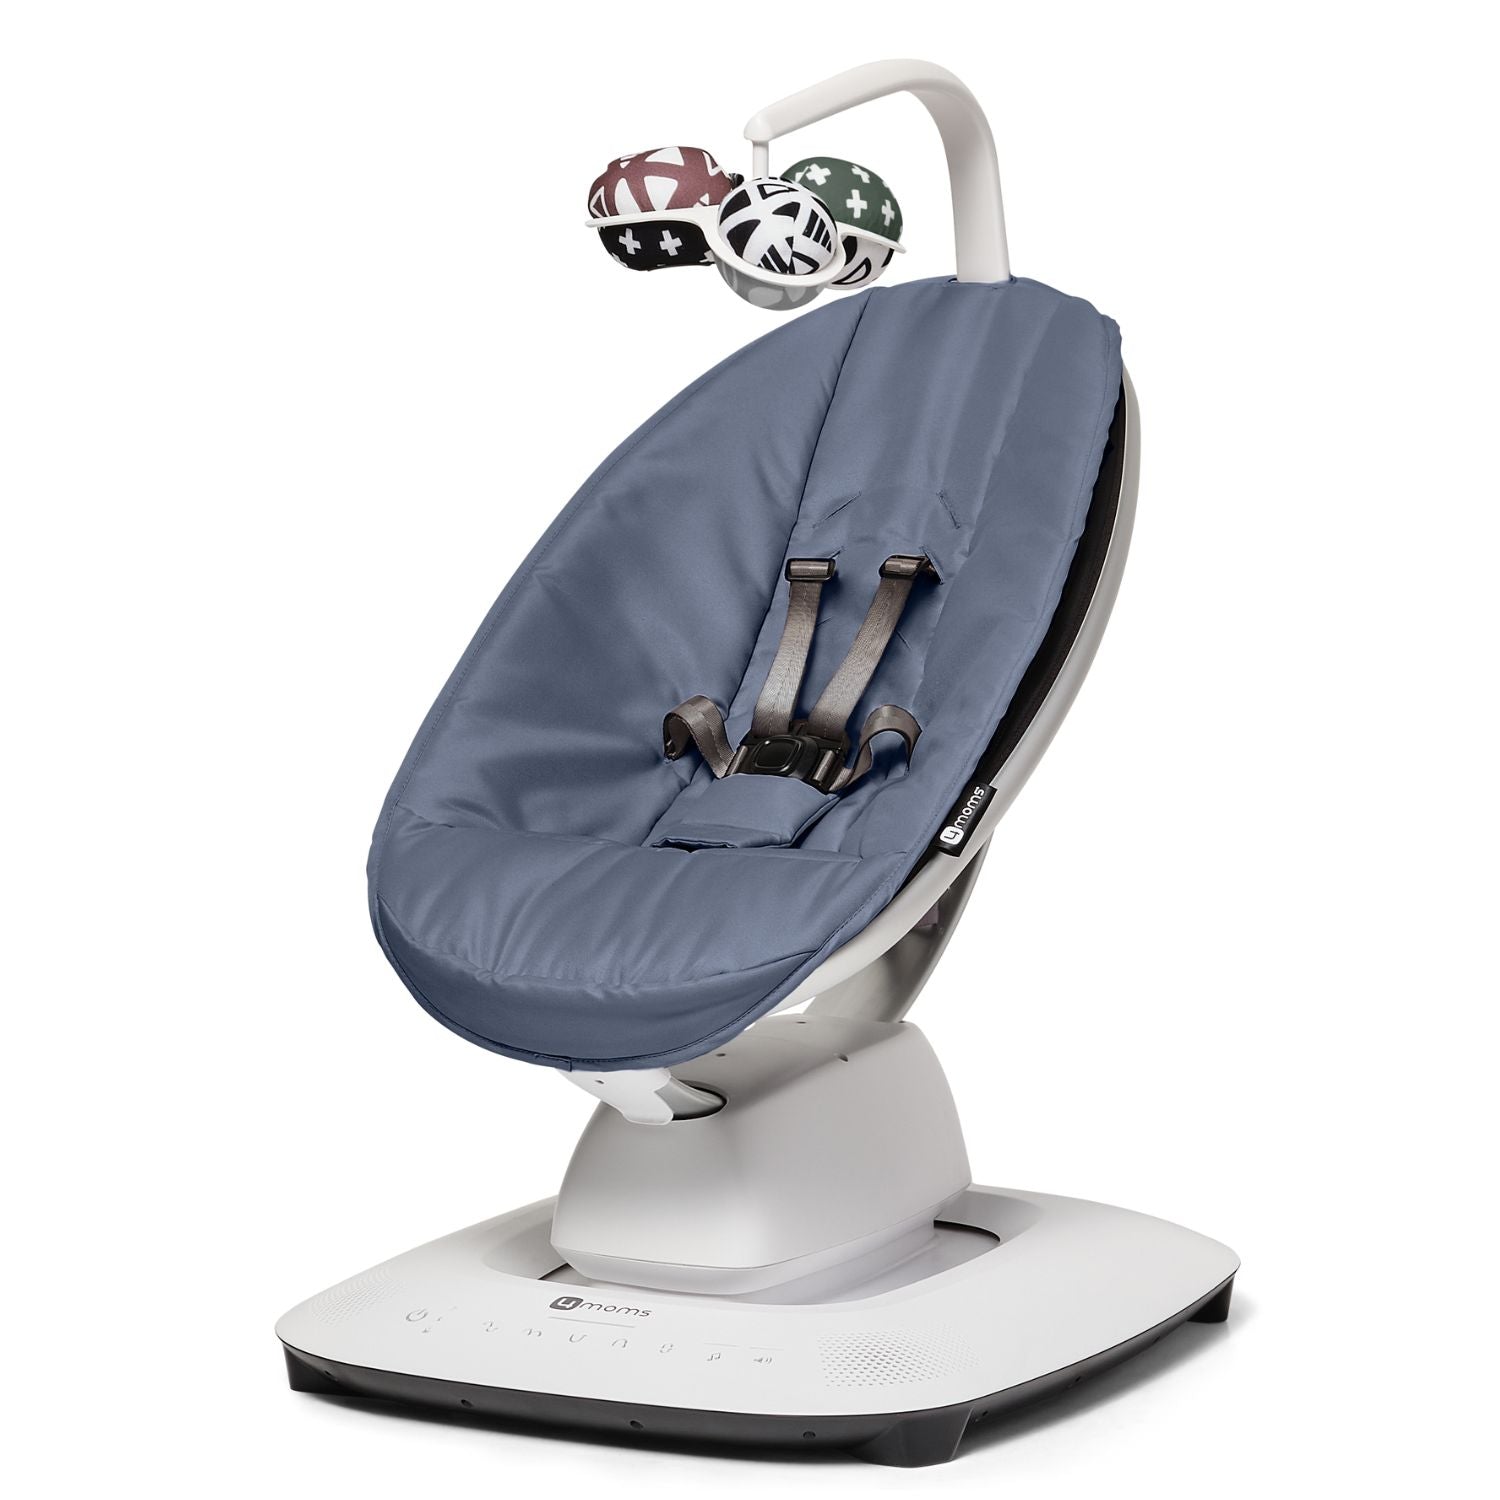 4moms mamaRoo 5 - Multi-Motion Baby Swing | The Baby Cubby